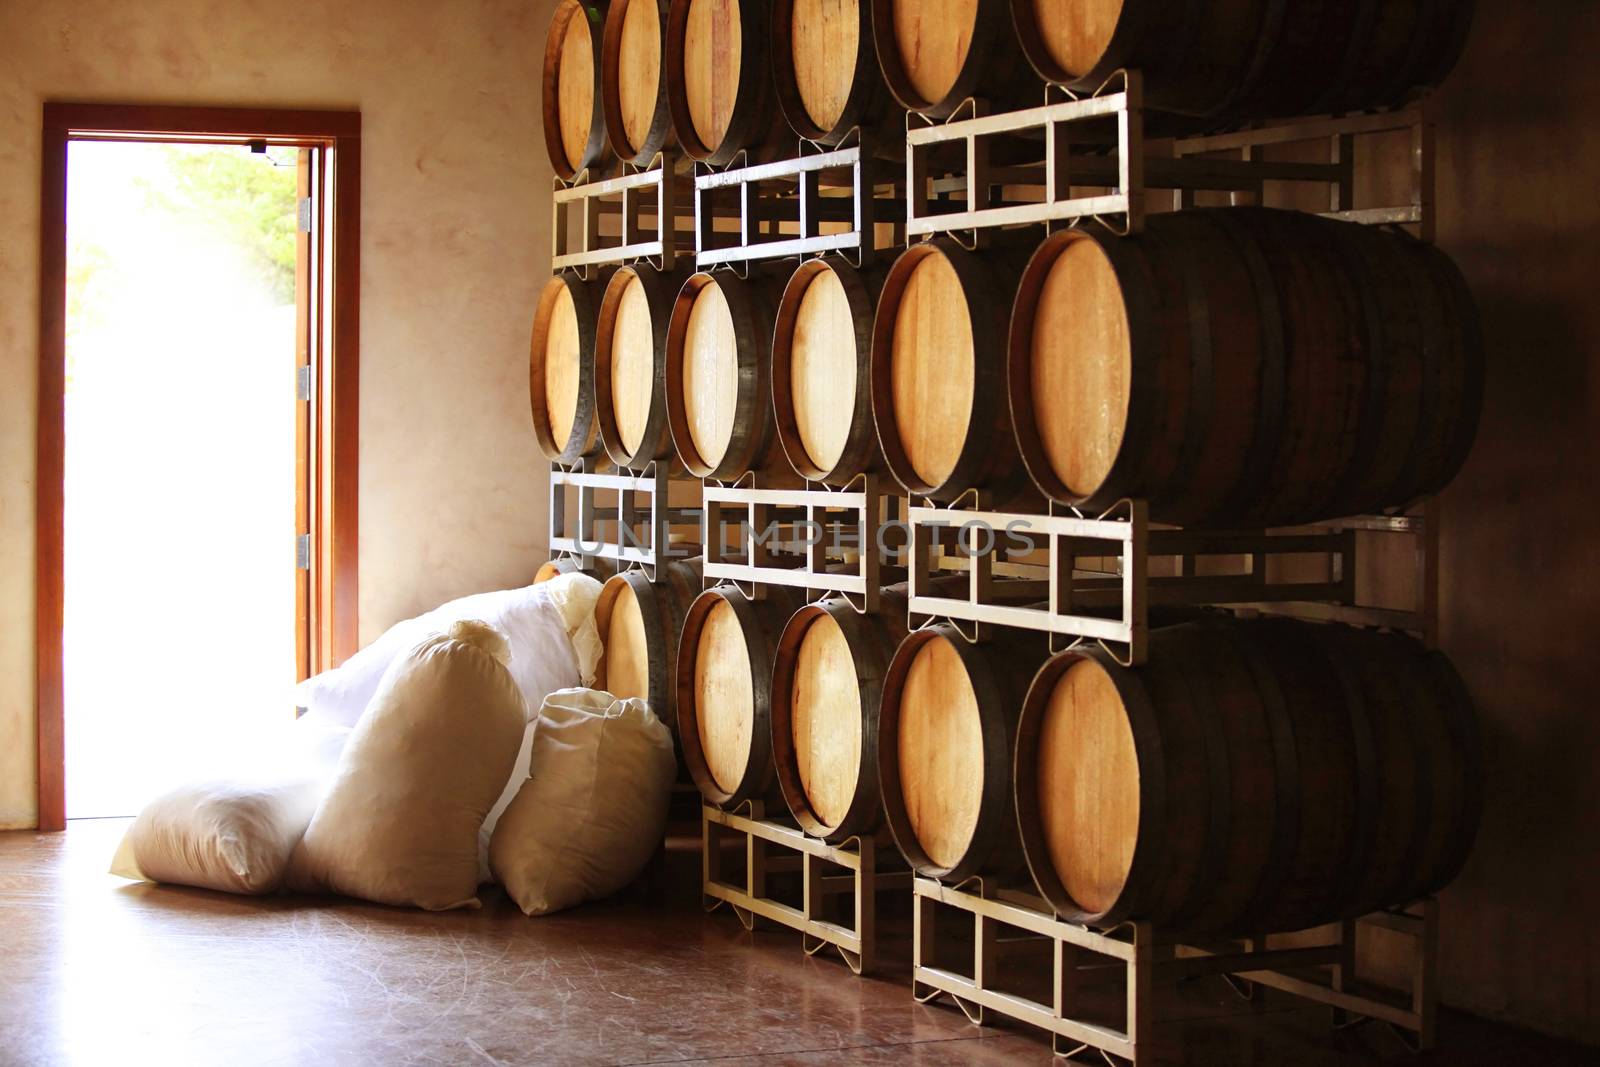 Barrels of wine and sugar by friday